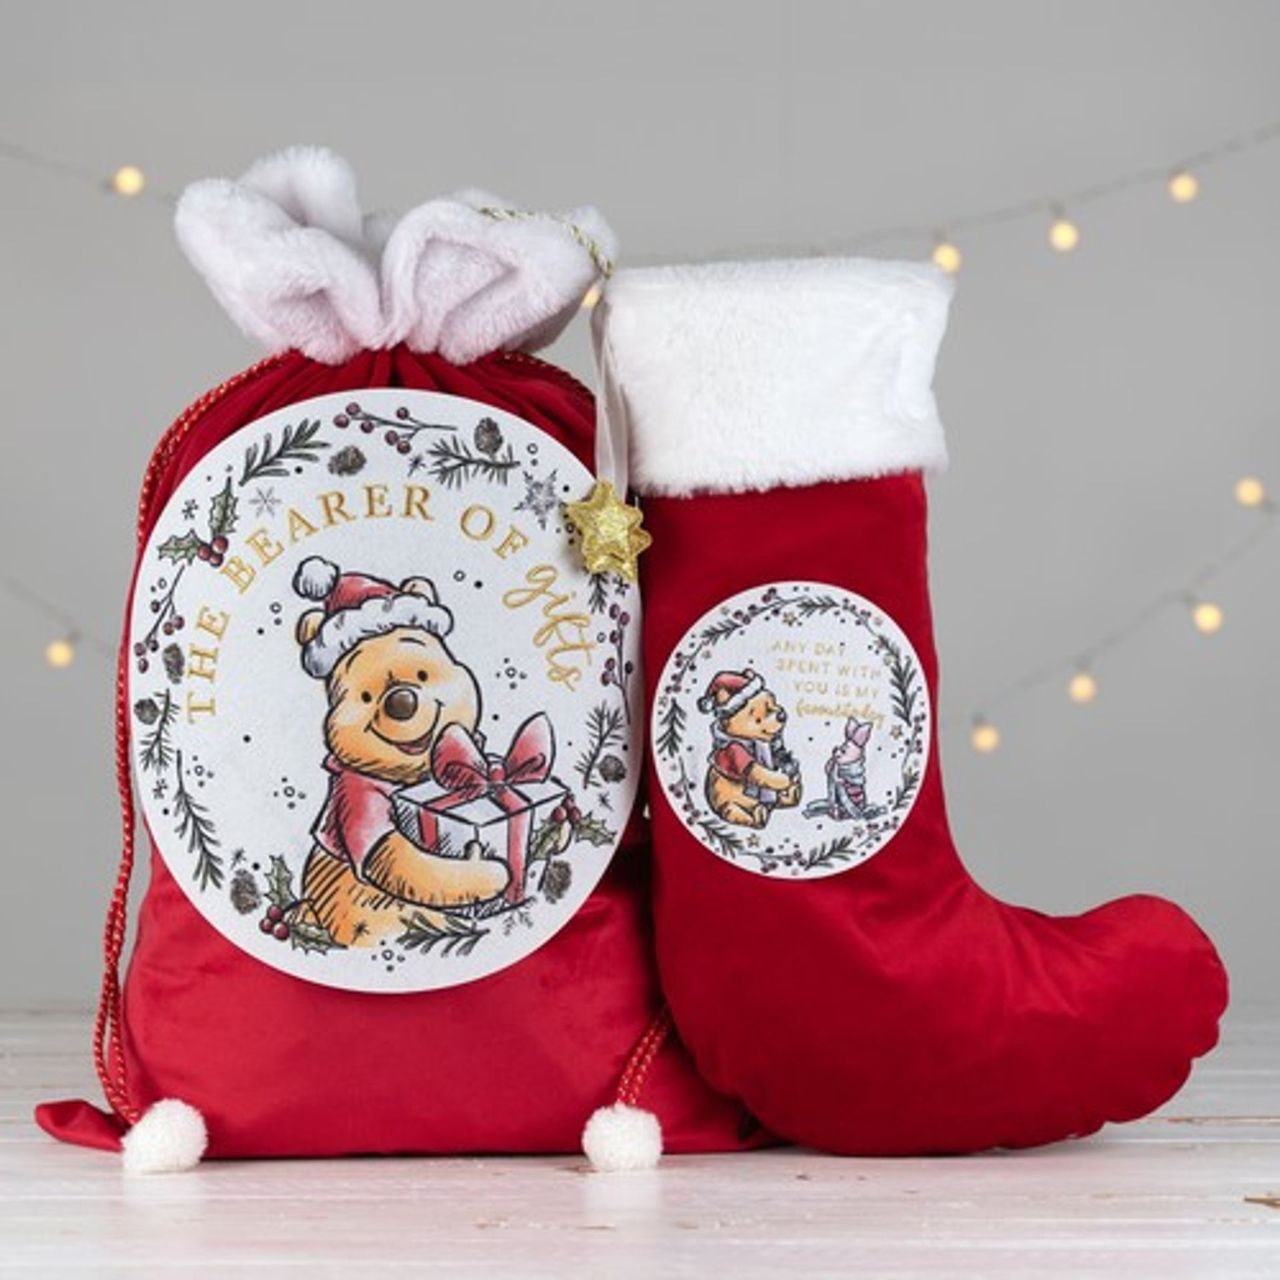 Disney Winnie Christmas Stocking "Favourite Day"  Fill this Winnie the Pooh stocking with gifts to brighten any little one's Christmas morning. With a sentimental quote featuring in sparkling gold letters above a delightful illustration of Winnie the Pooh and Piglet, this sack is as adorable as it is unique.